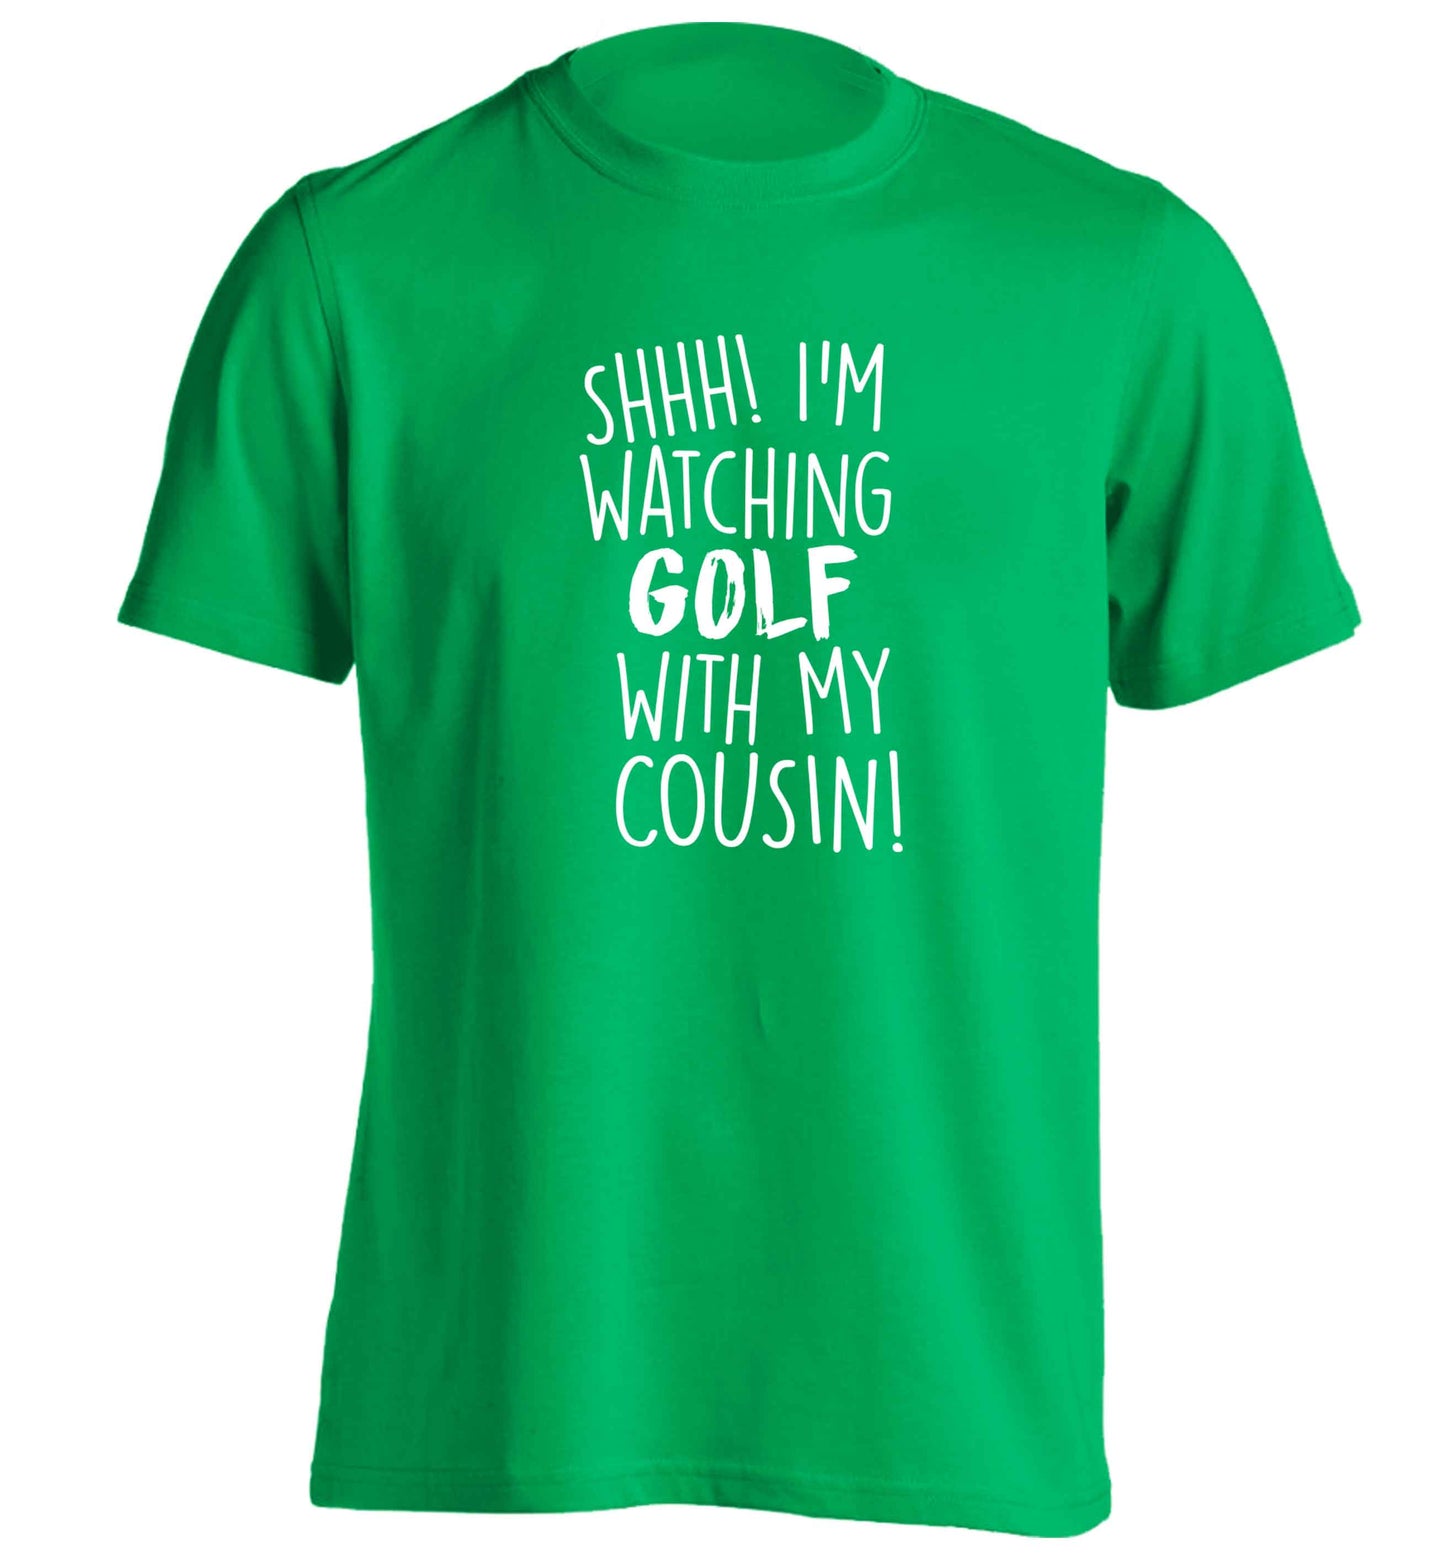 Shh I'm watching golf with my cousin adults unisex green Tshirt 2XL